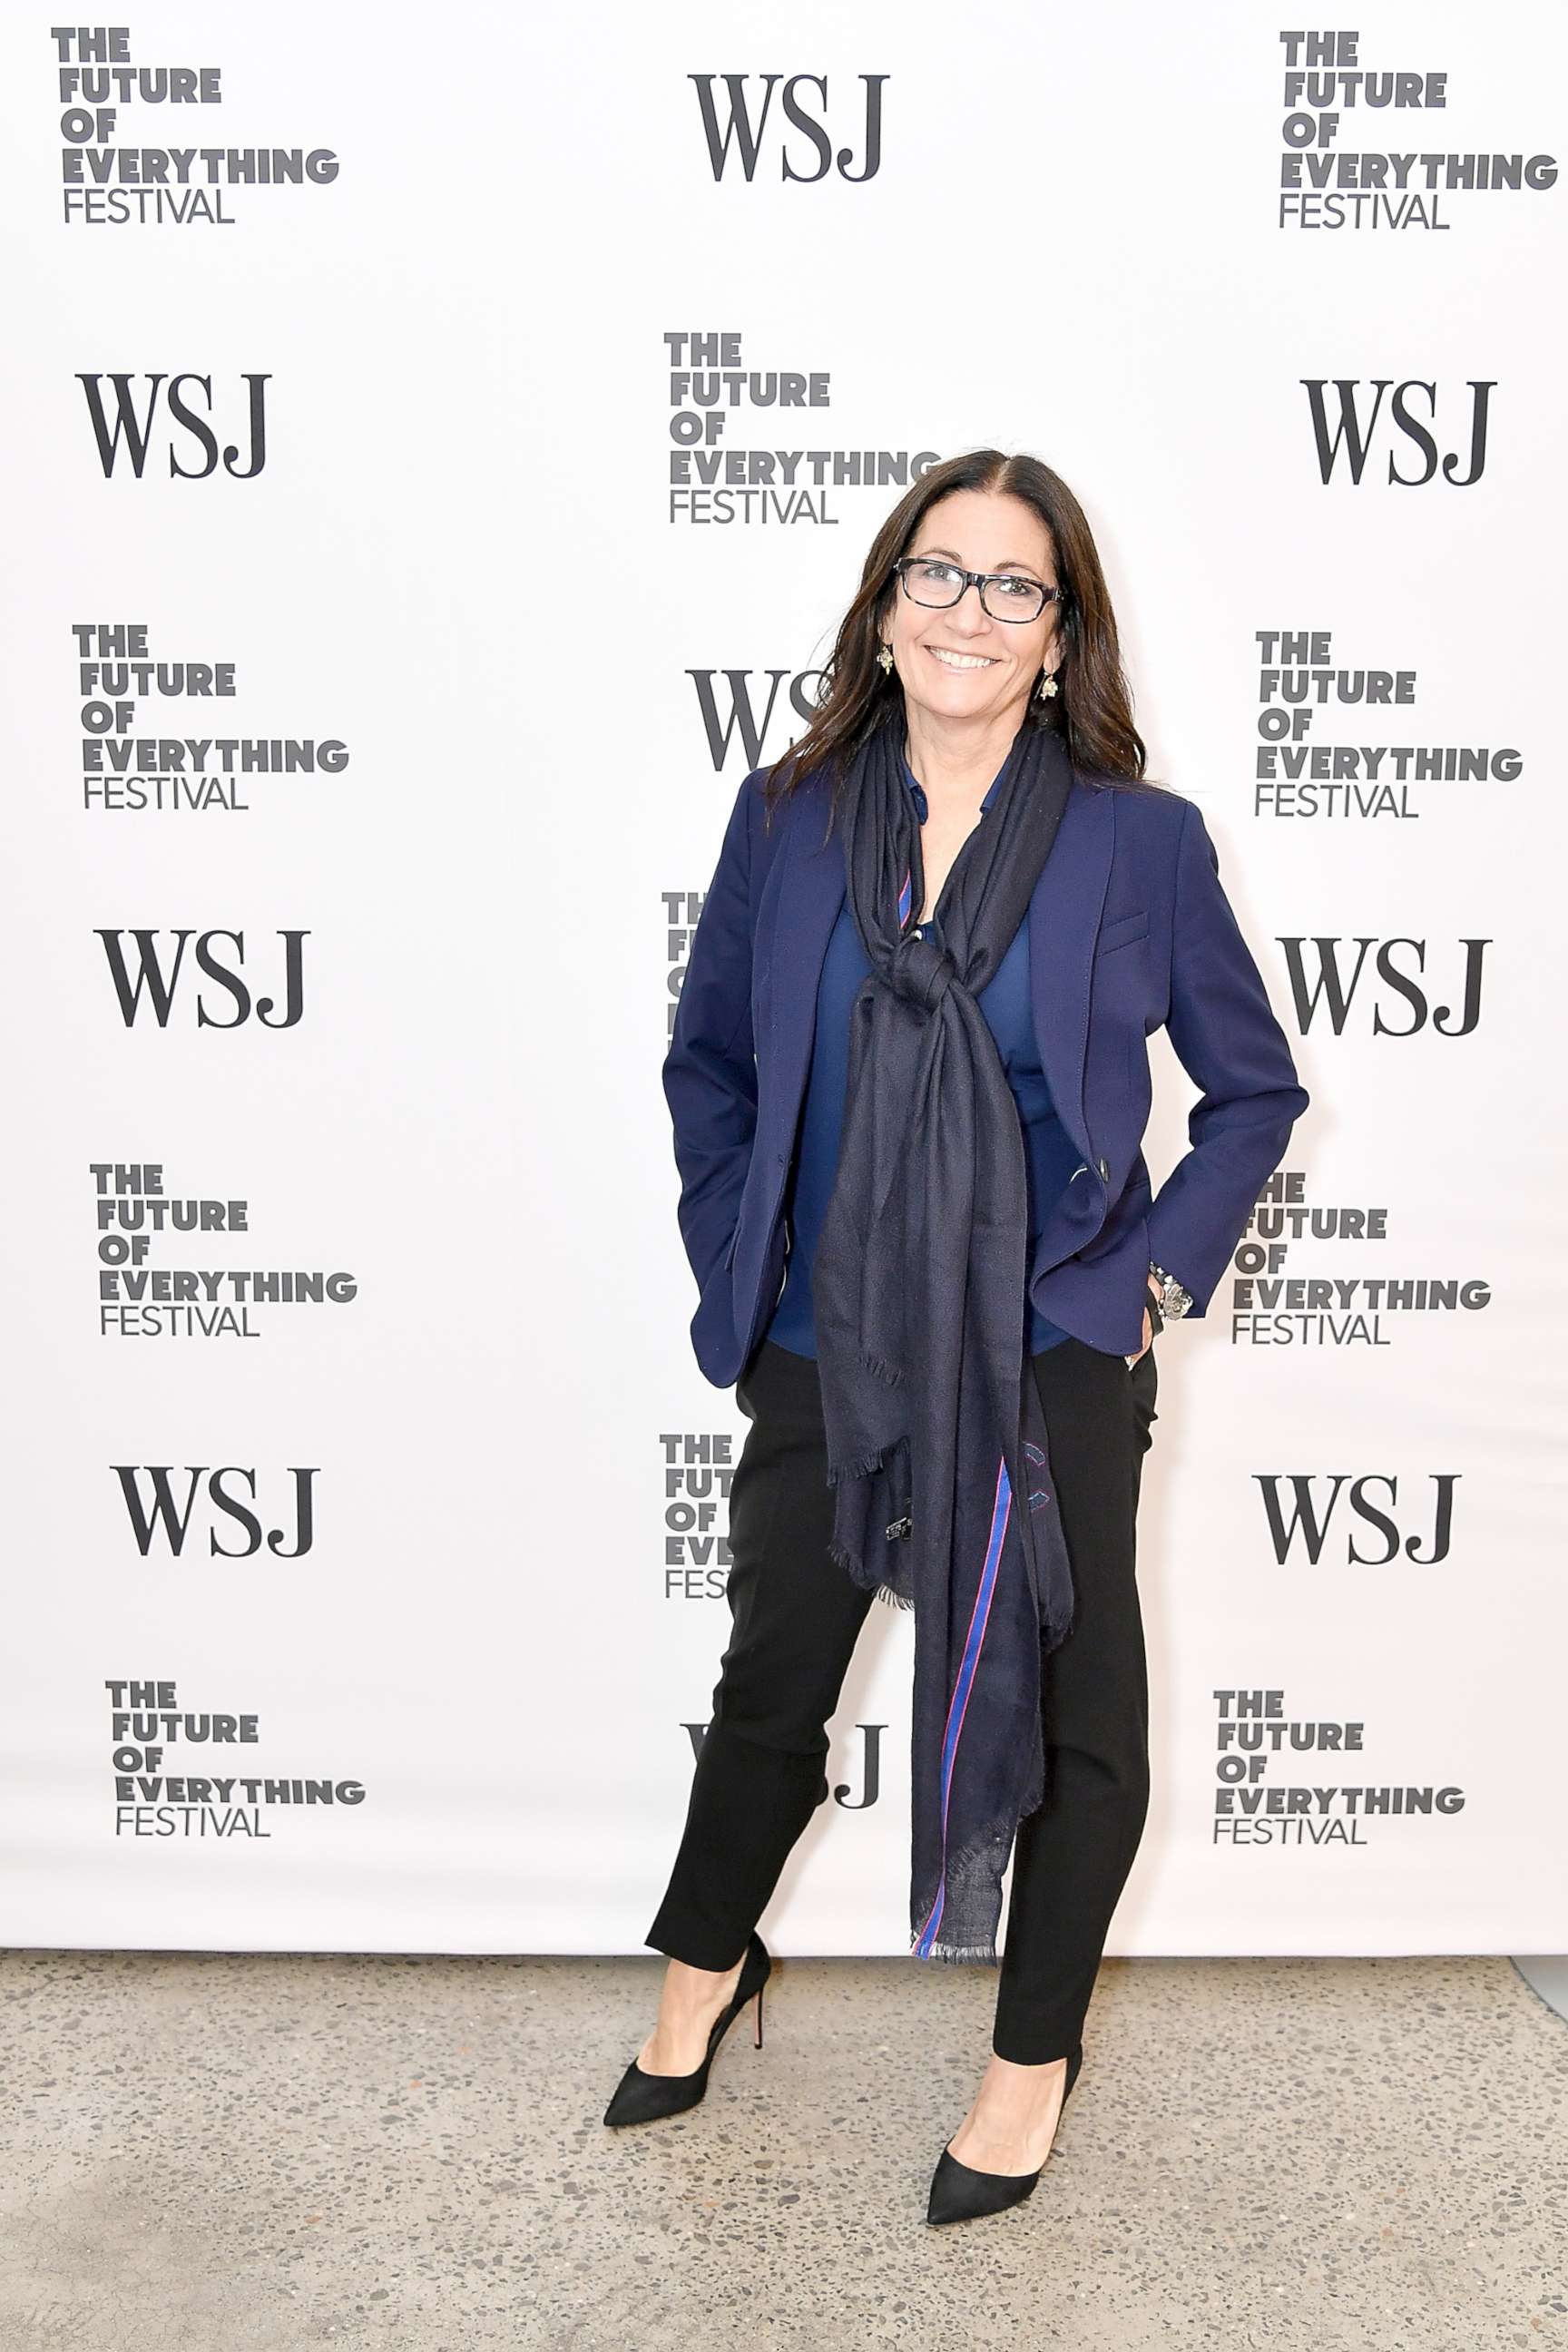 PHOTO: Makeup artist Bobbi Brown attends an event at Spring Studios in New York, May 8, 2018.